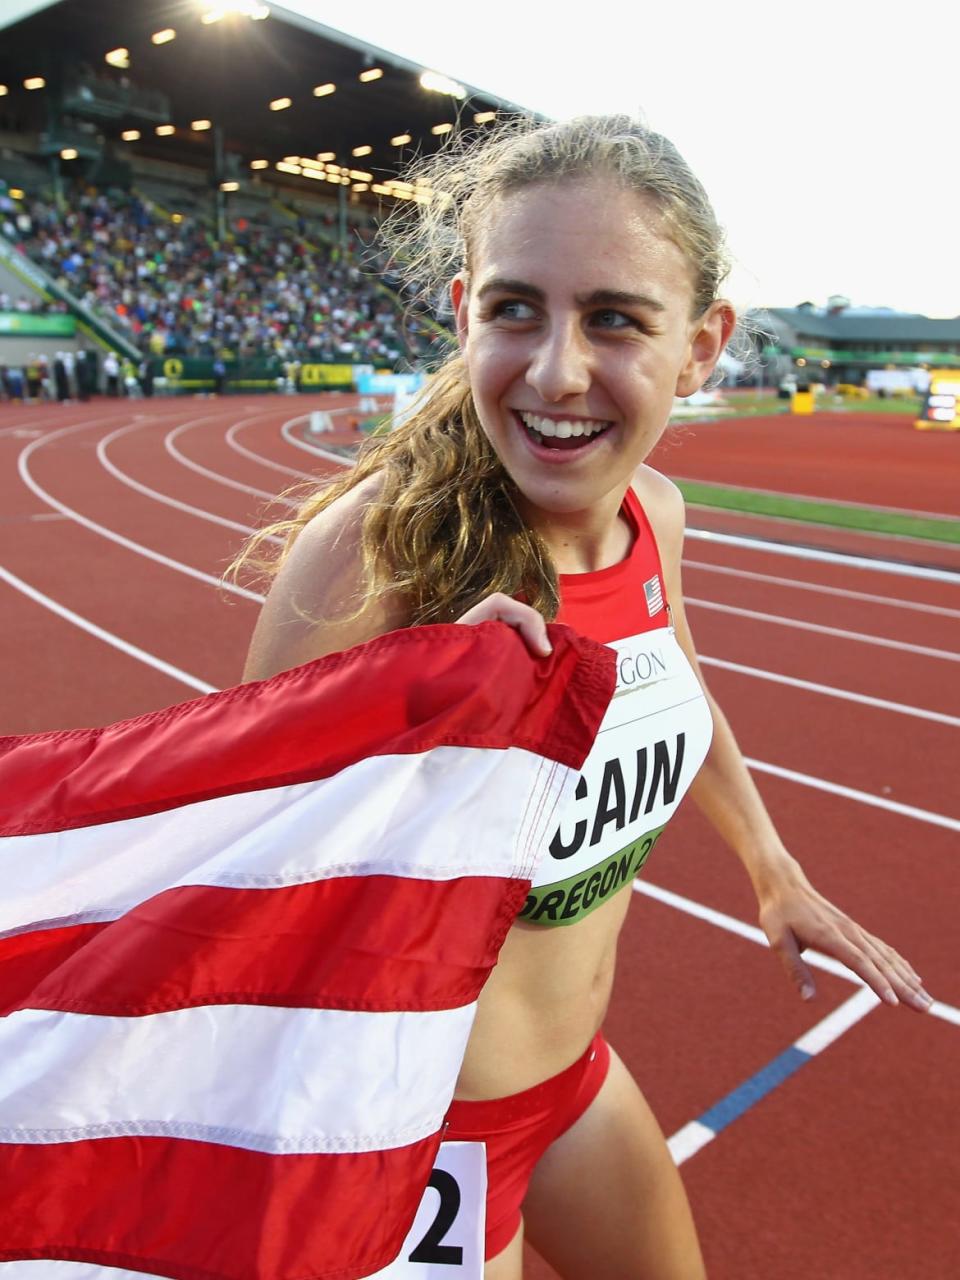 <div class="inline-image__caption"><p>Mary Cain after winning at the IAAF World Junior Championships at Hayward Field on July 24, 2014, in Eugene, Oregon.</p></div> <div class="inline-image__credit">Jonathan Ferrey/Getty</div>